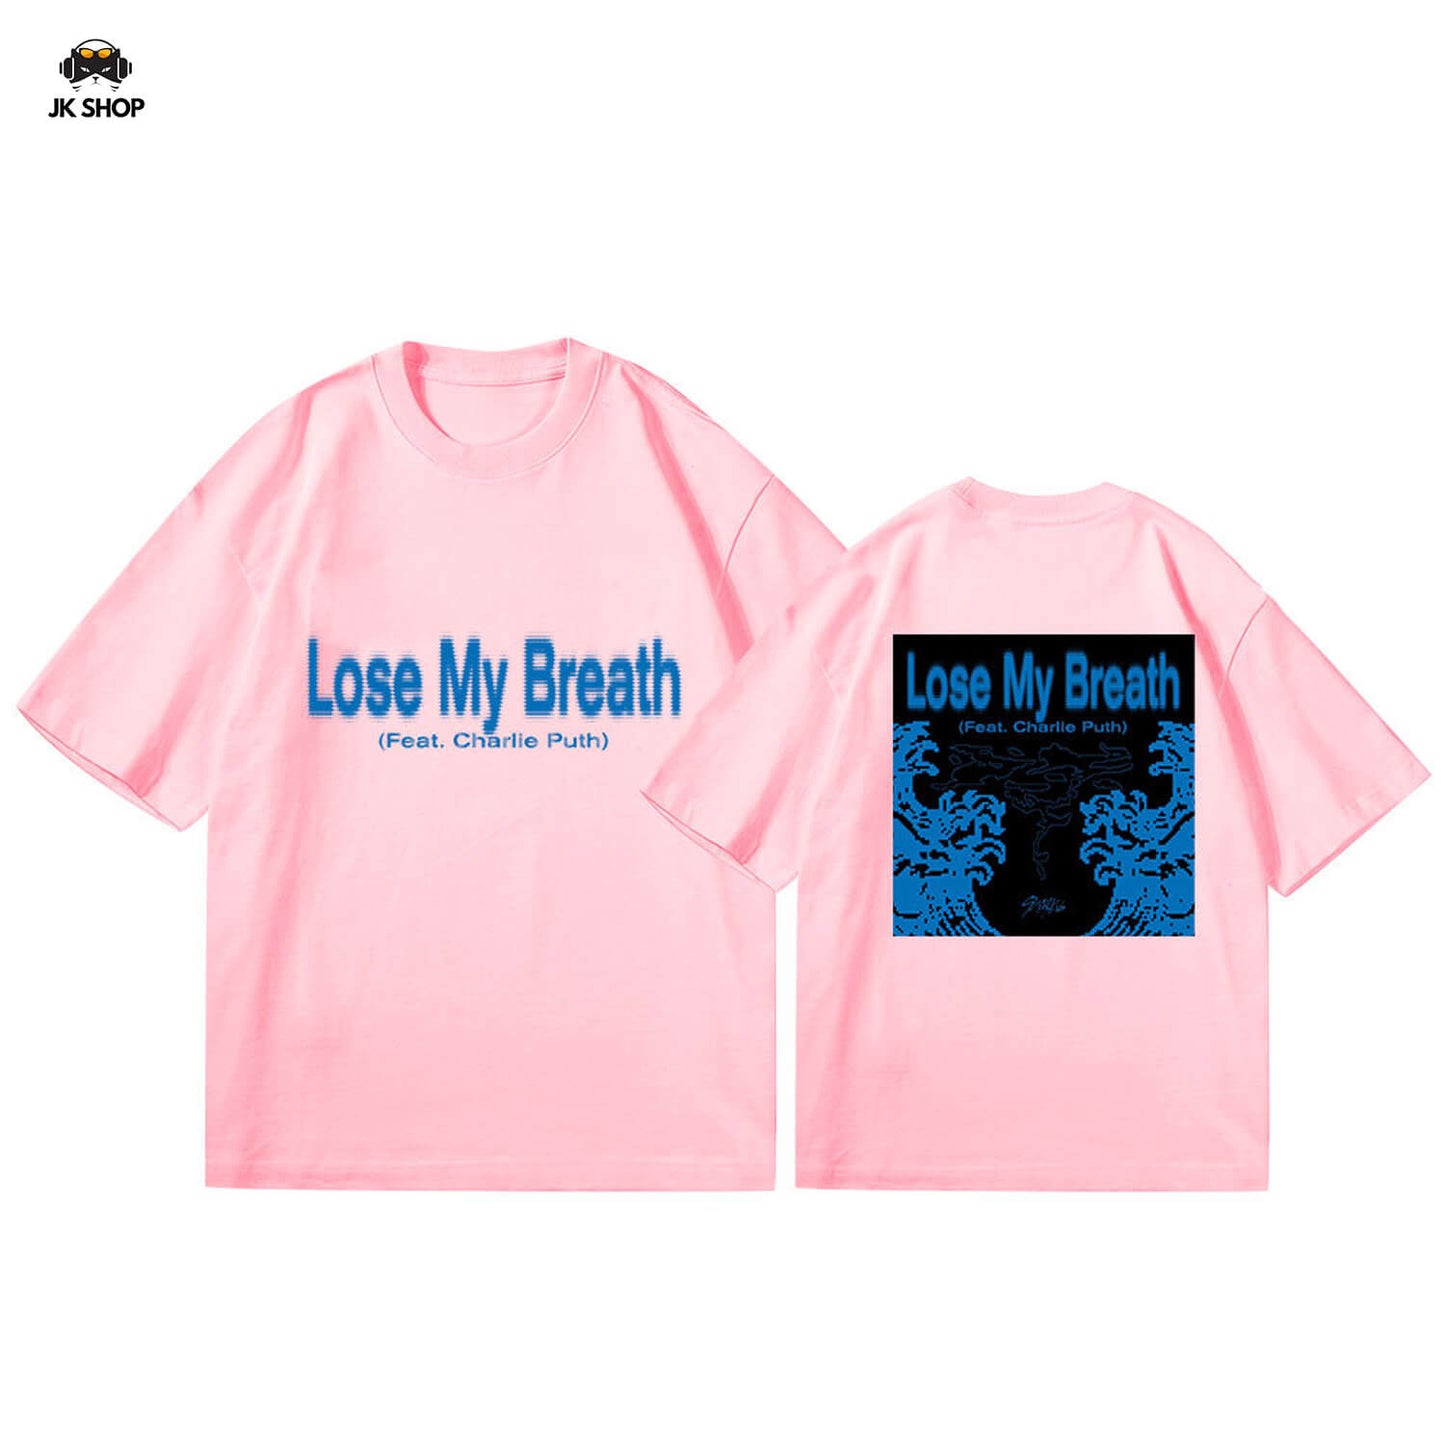 STAY Lose My Breath Cotton T-Shirt Collection 1